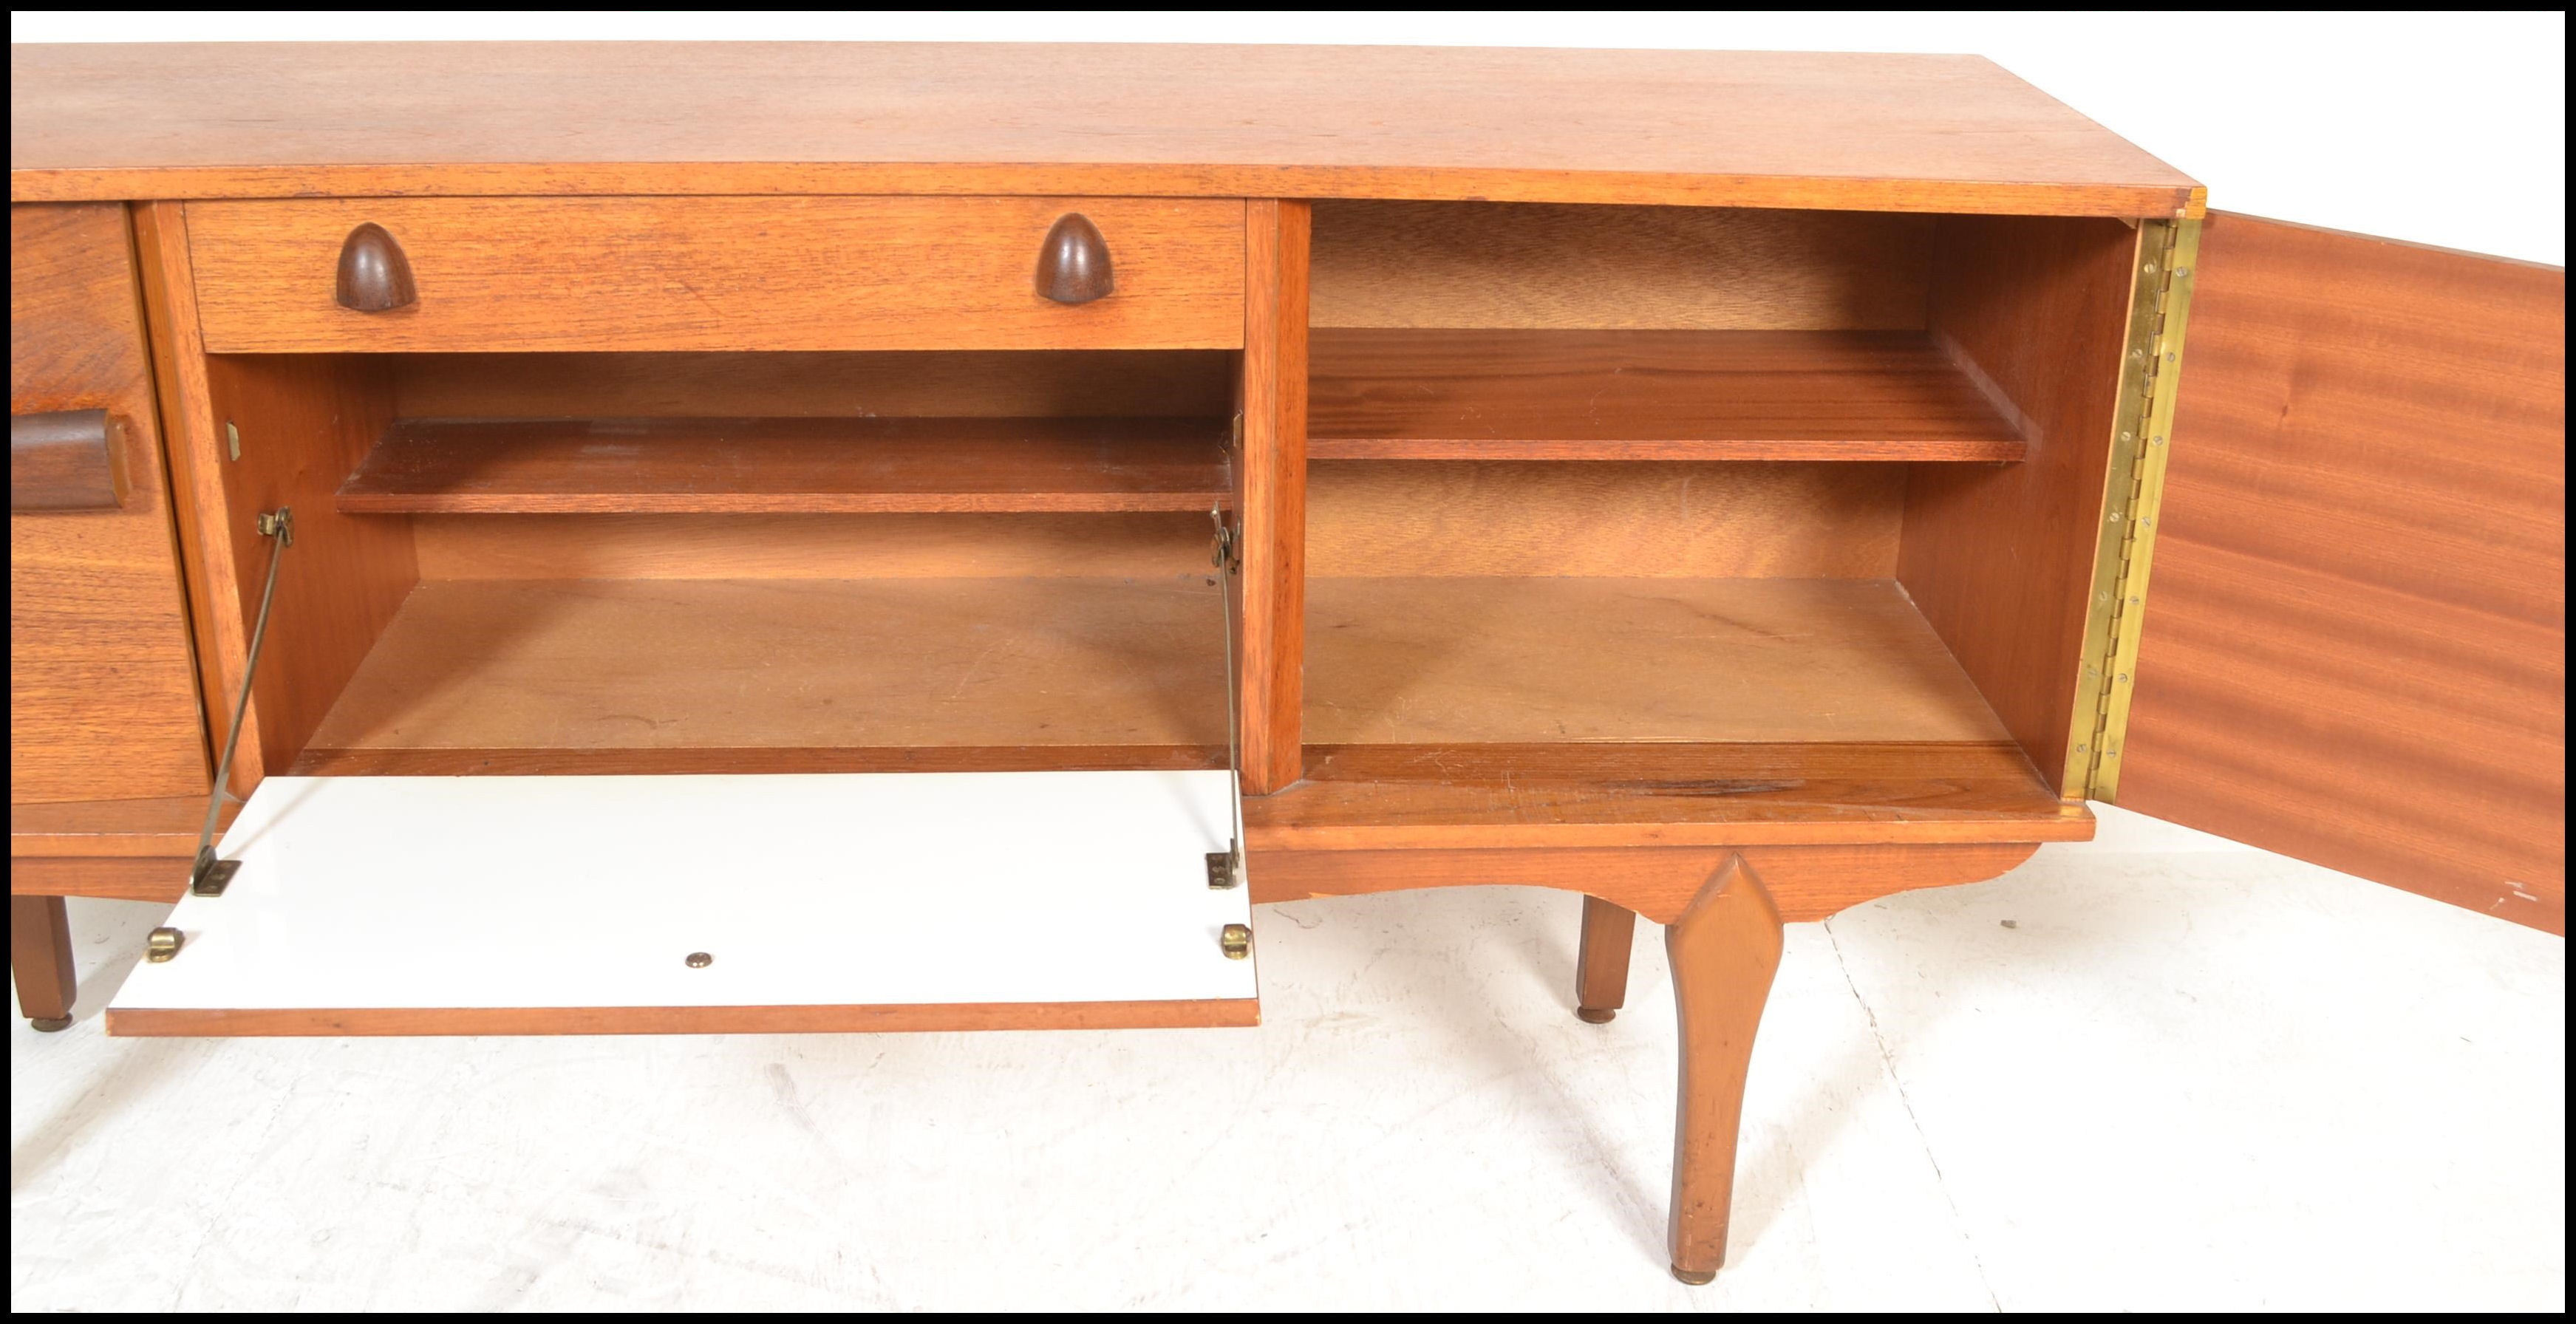 A vintage mid 20th century teak wood sideboard having a central drop down bar compartment with - Image 5 of 6